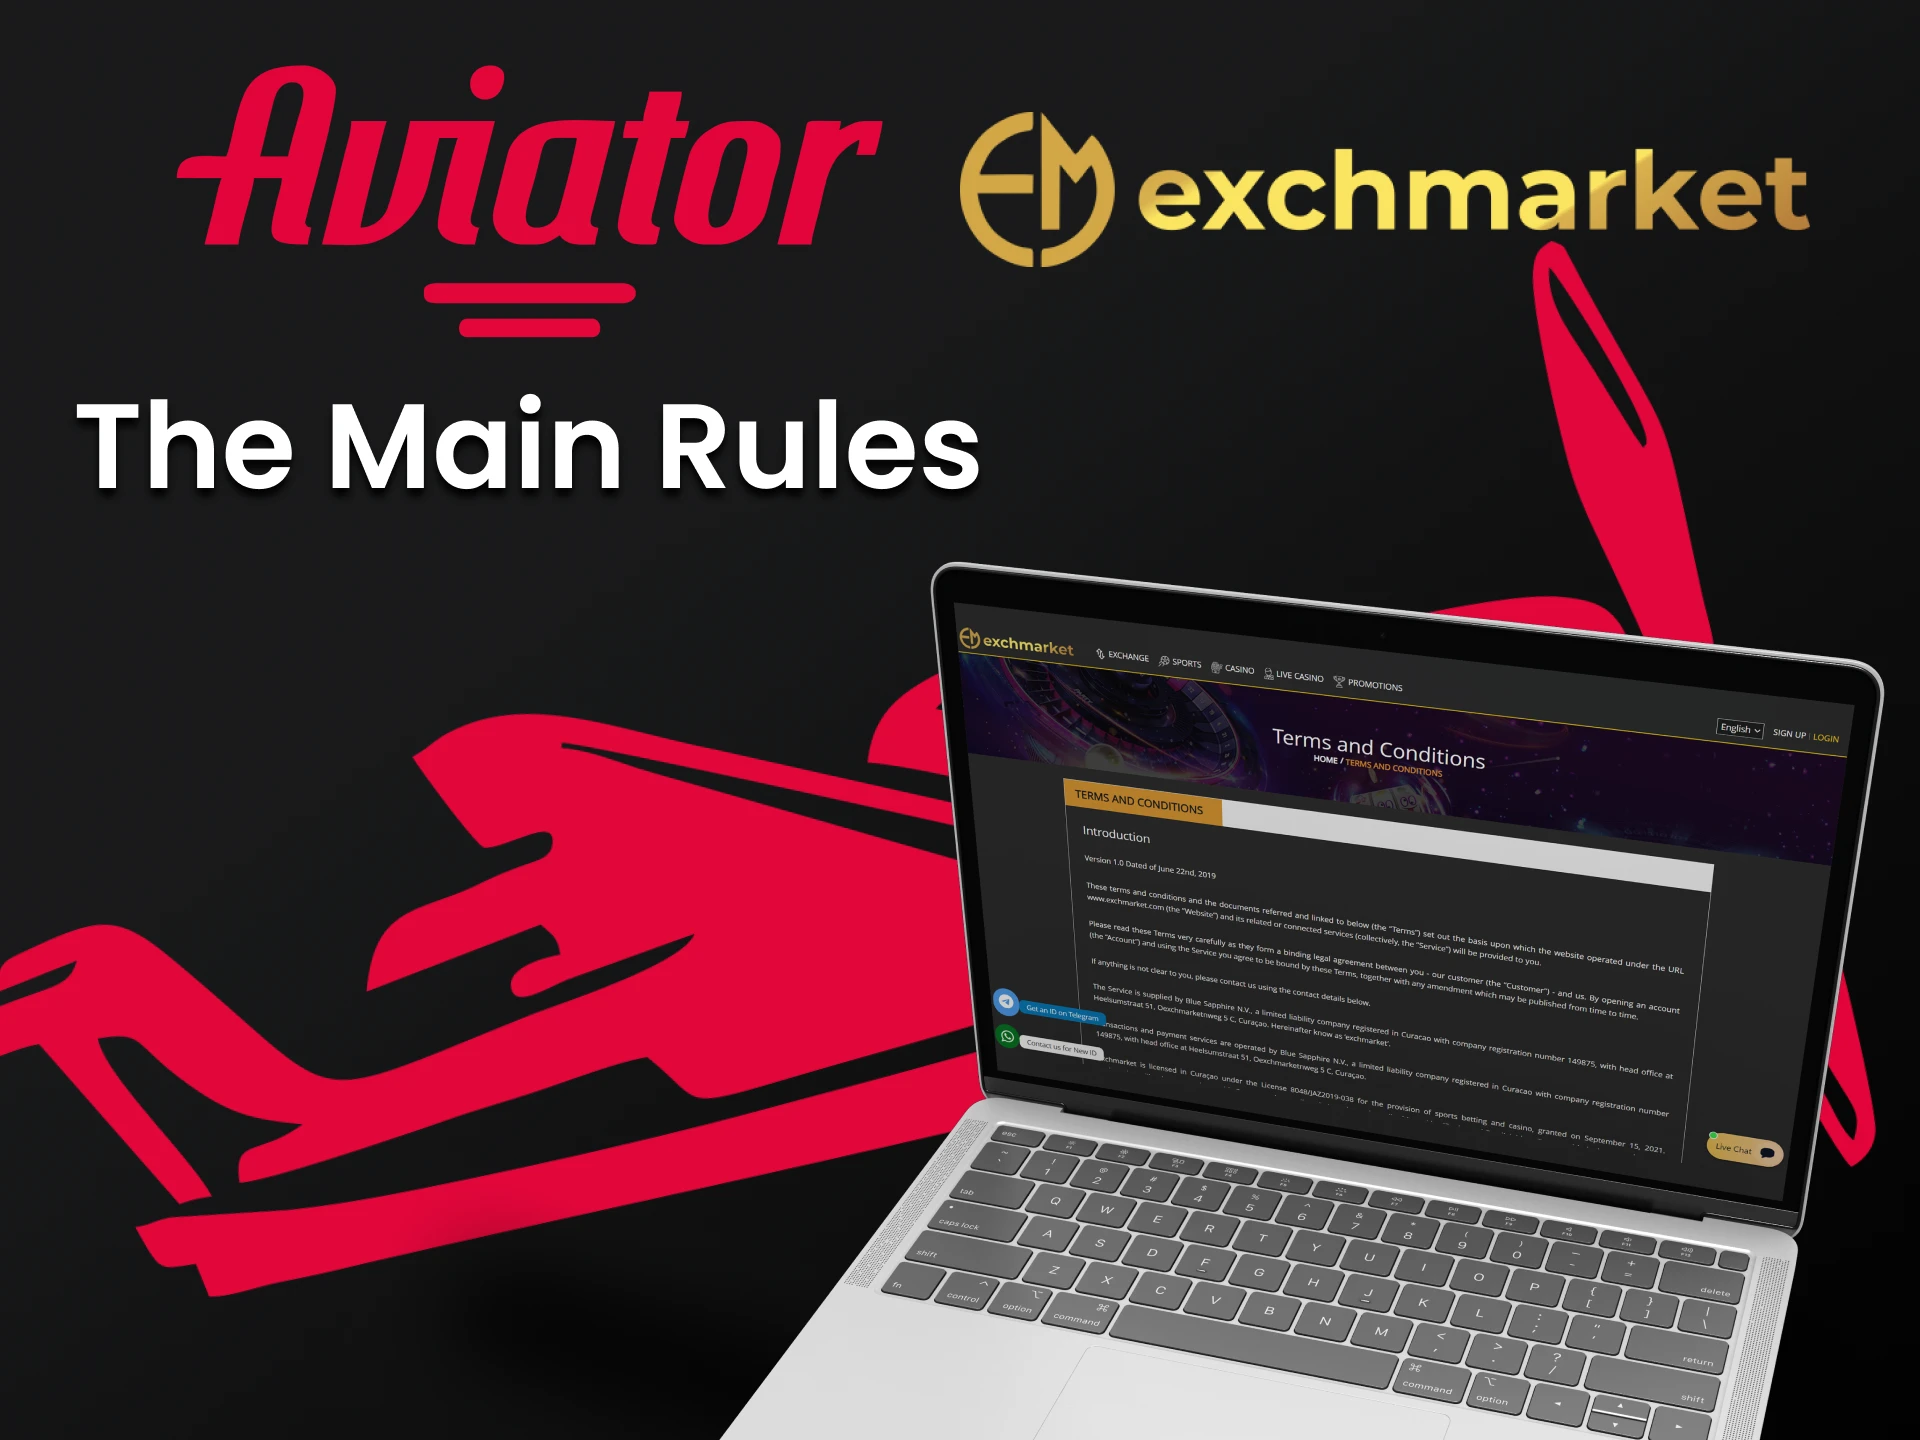 Learn about the rules of the Exchmarket service.